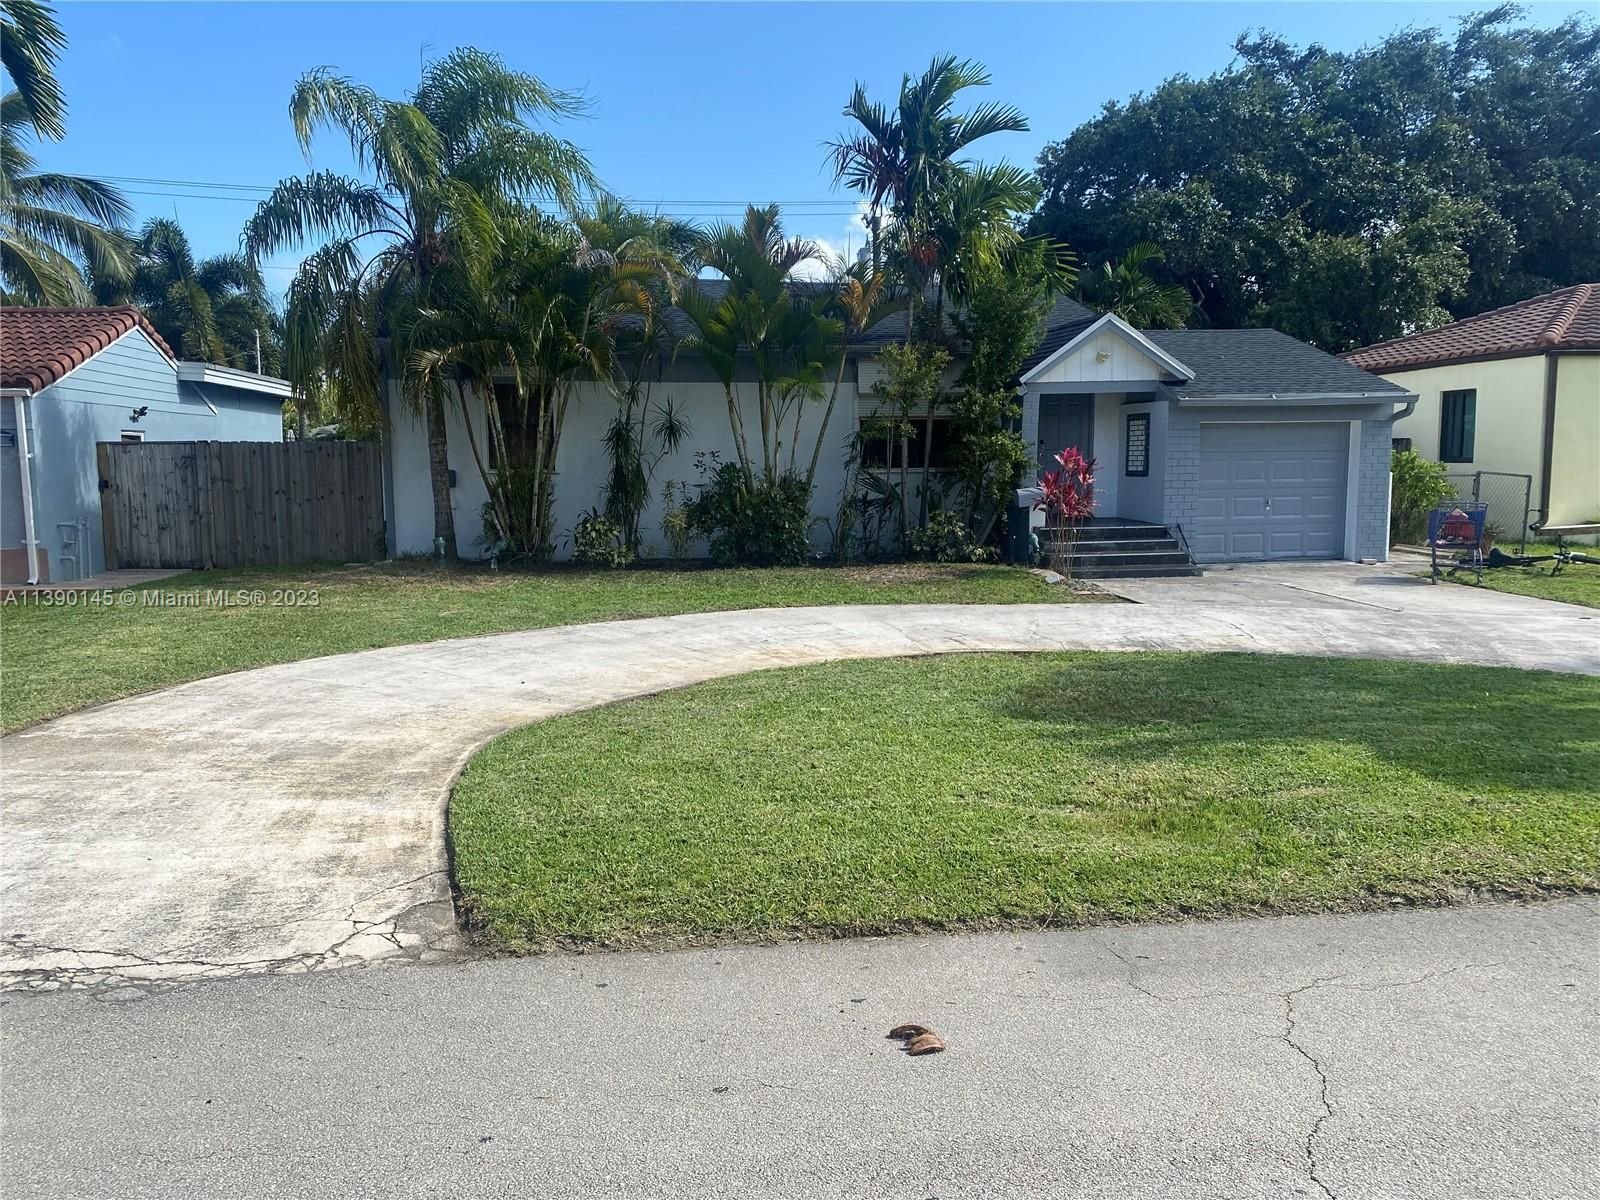 Real estate property located at 1516 Funston St, Broward County, Hollywood, FL